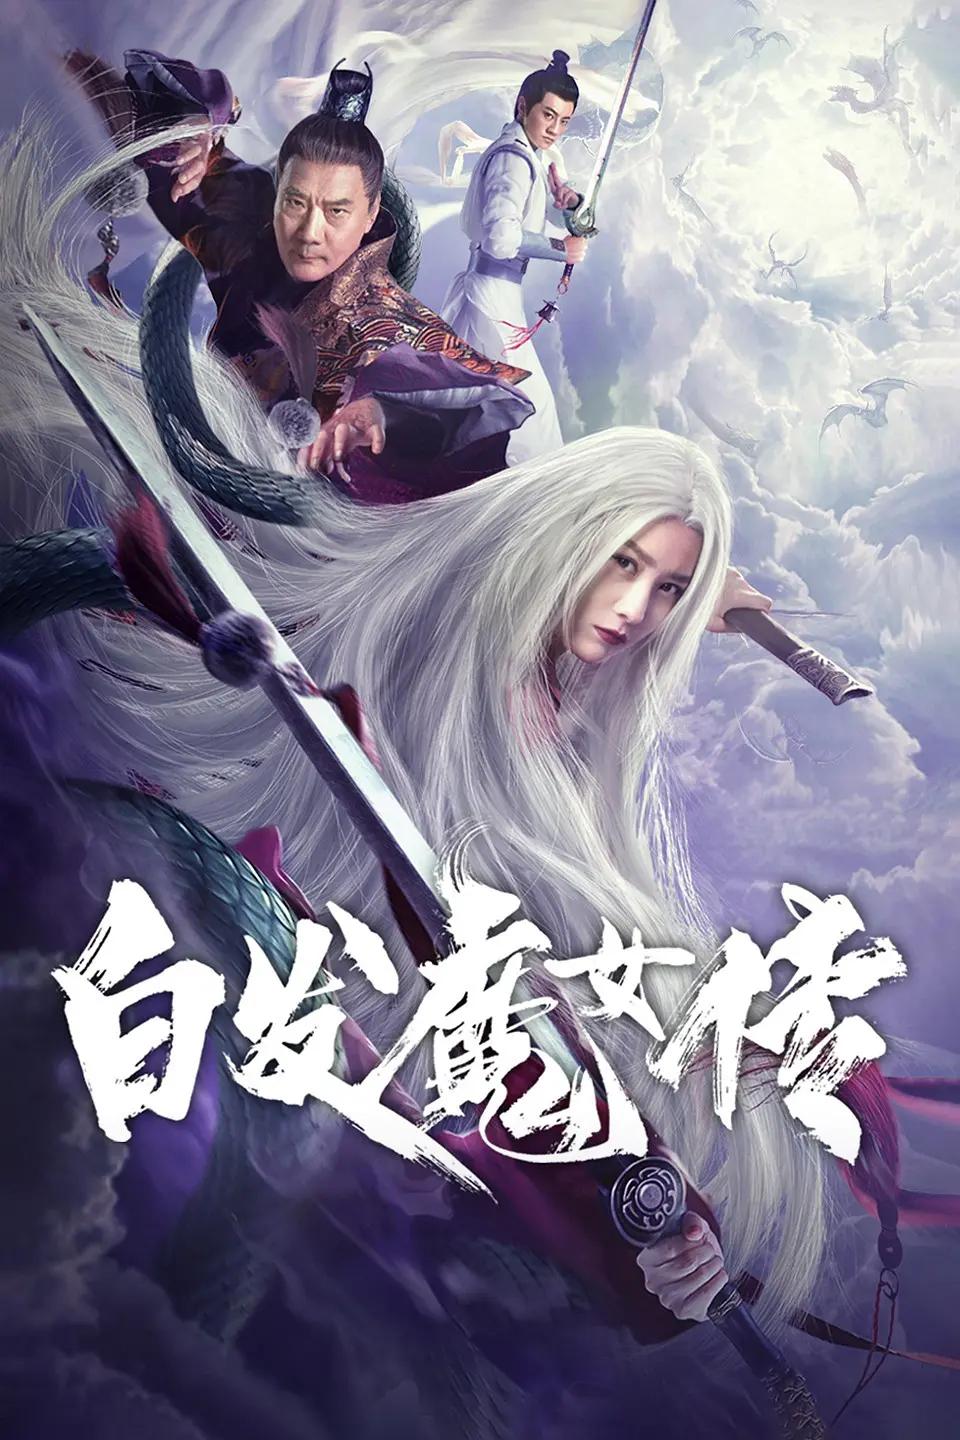 White Haired Devil Lady 2020 Dual Audio Hindi ORG 400MB HDRip 720p HEVC x265 Download